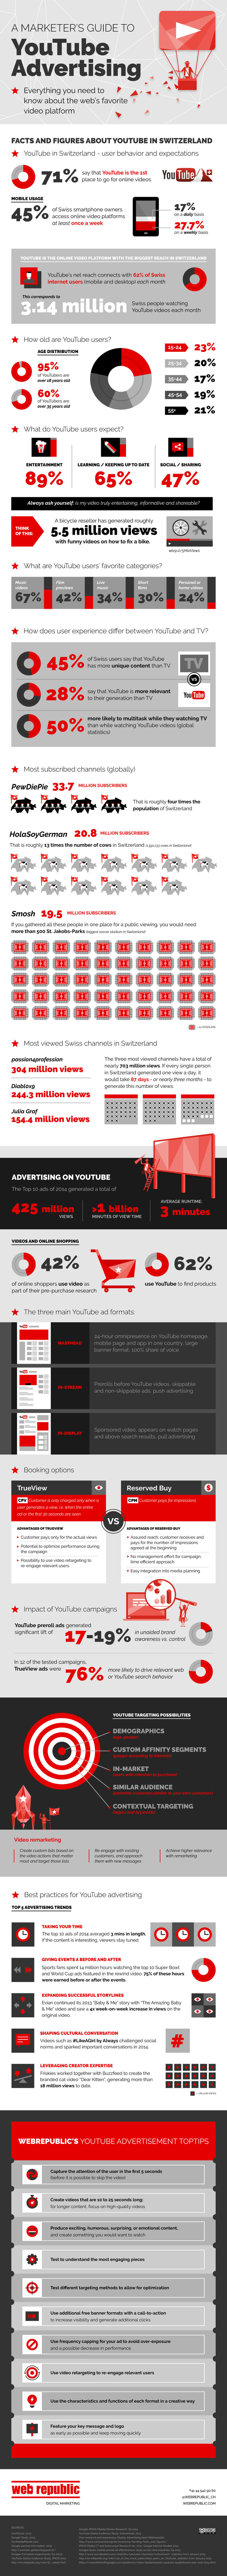 Key Facts about Advertising on Youtube - #infographic